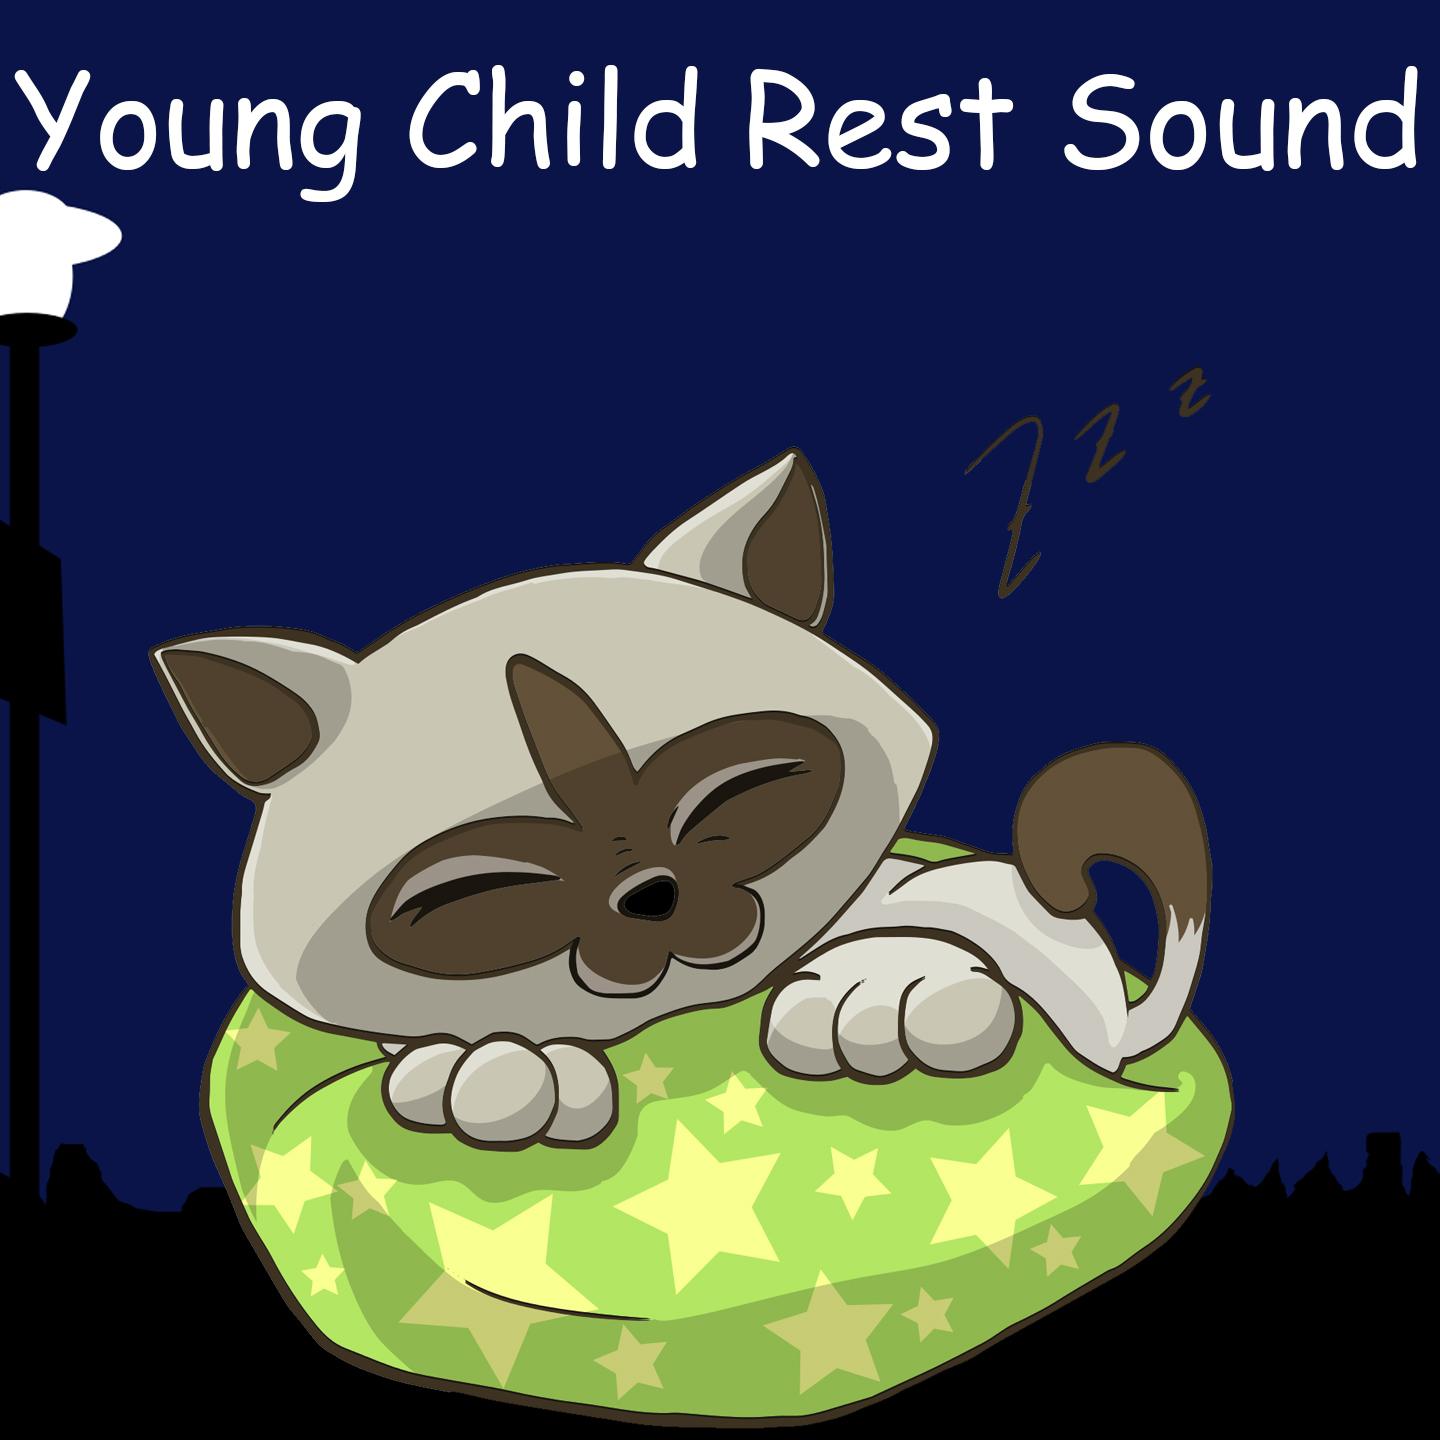 Young Child Rest Sound